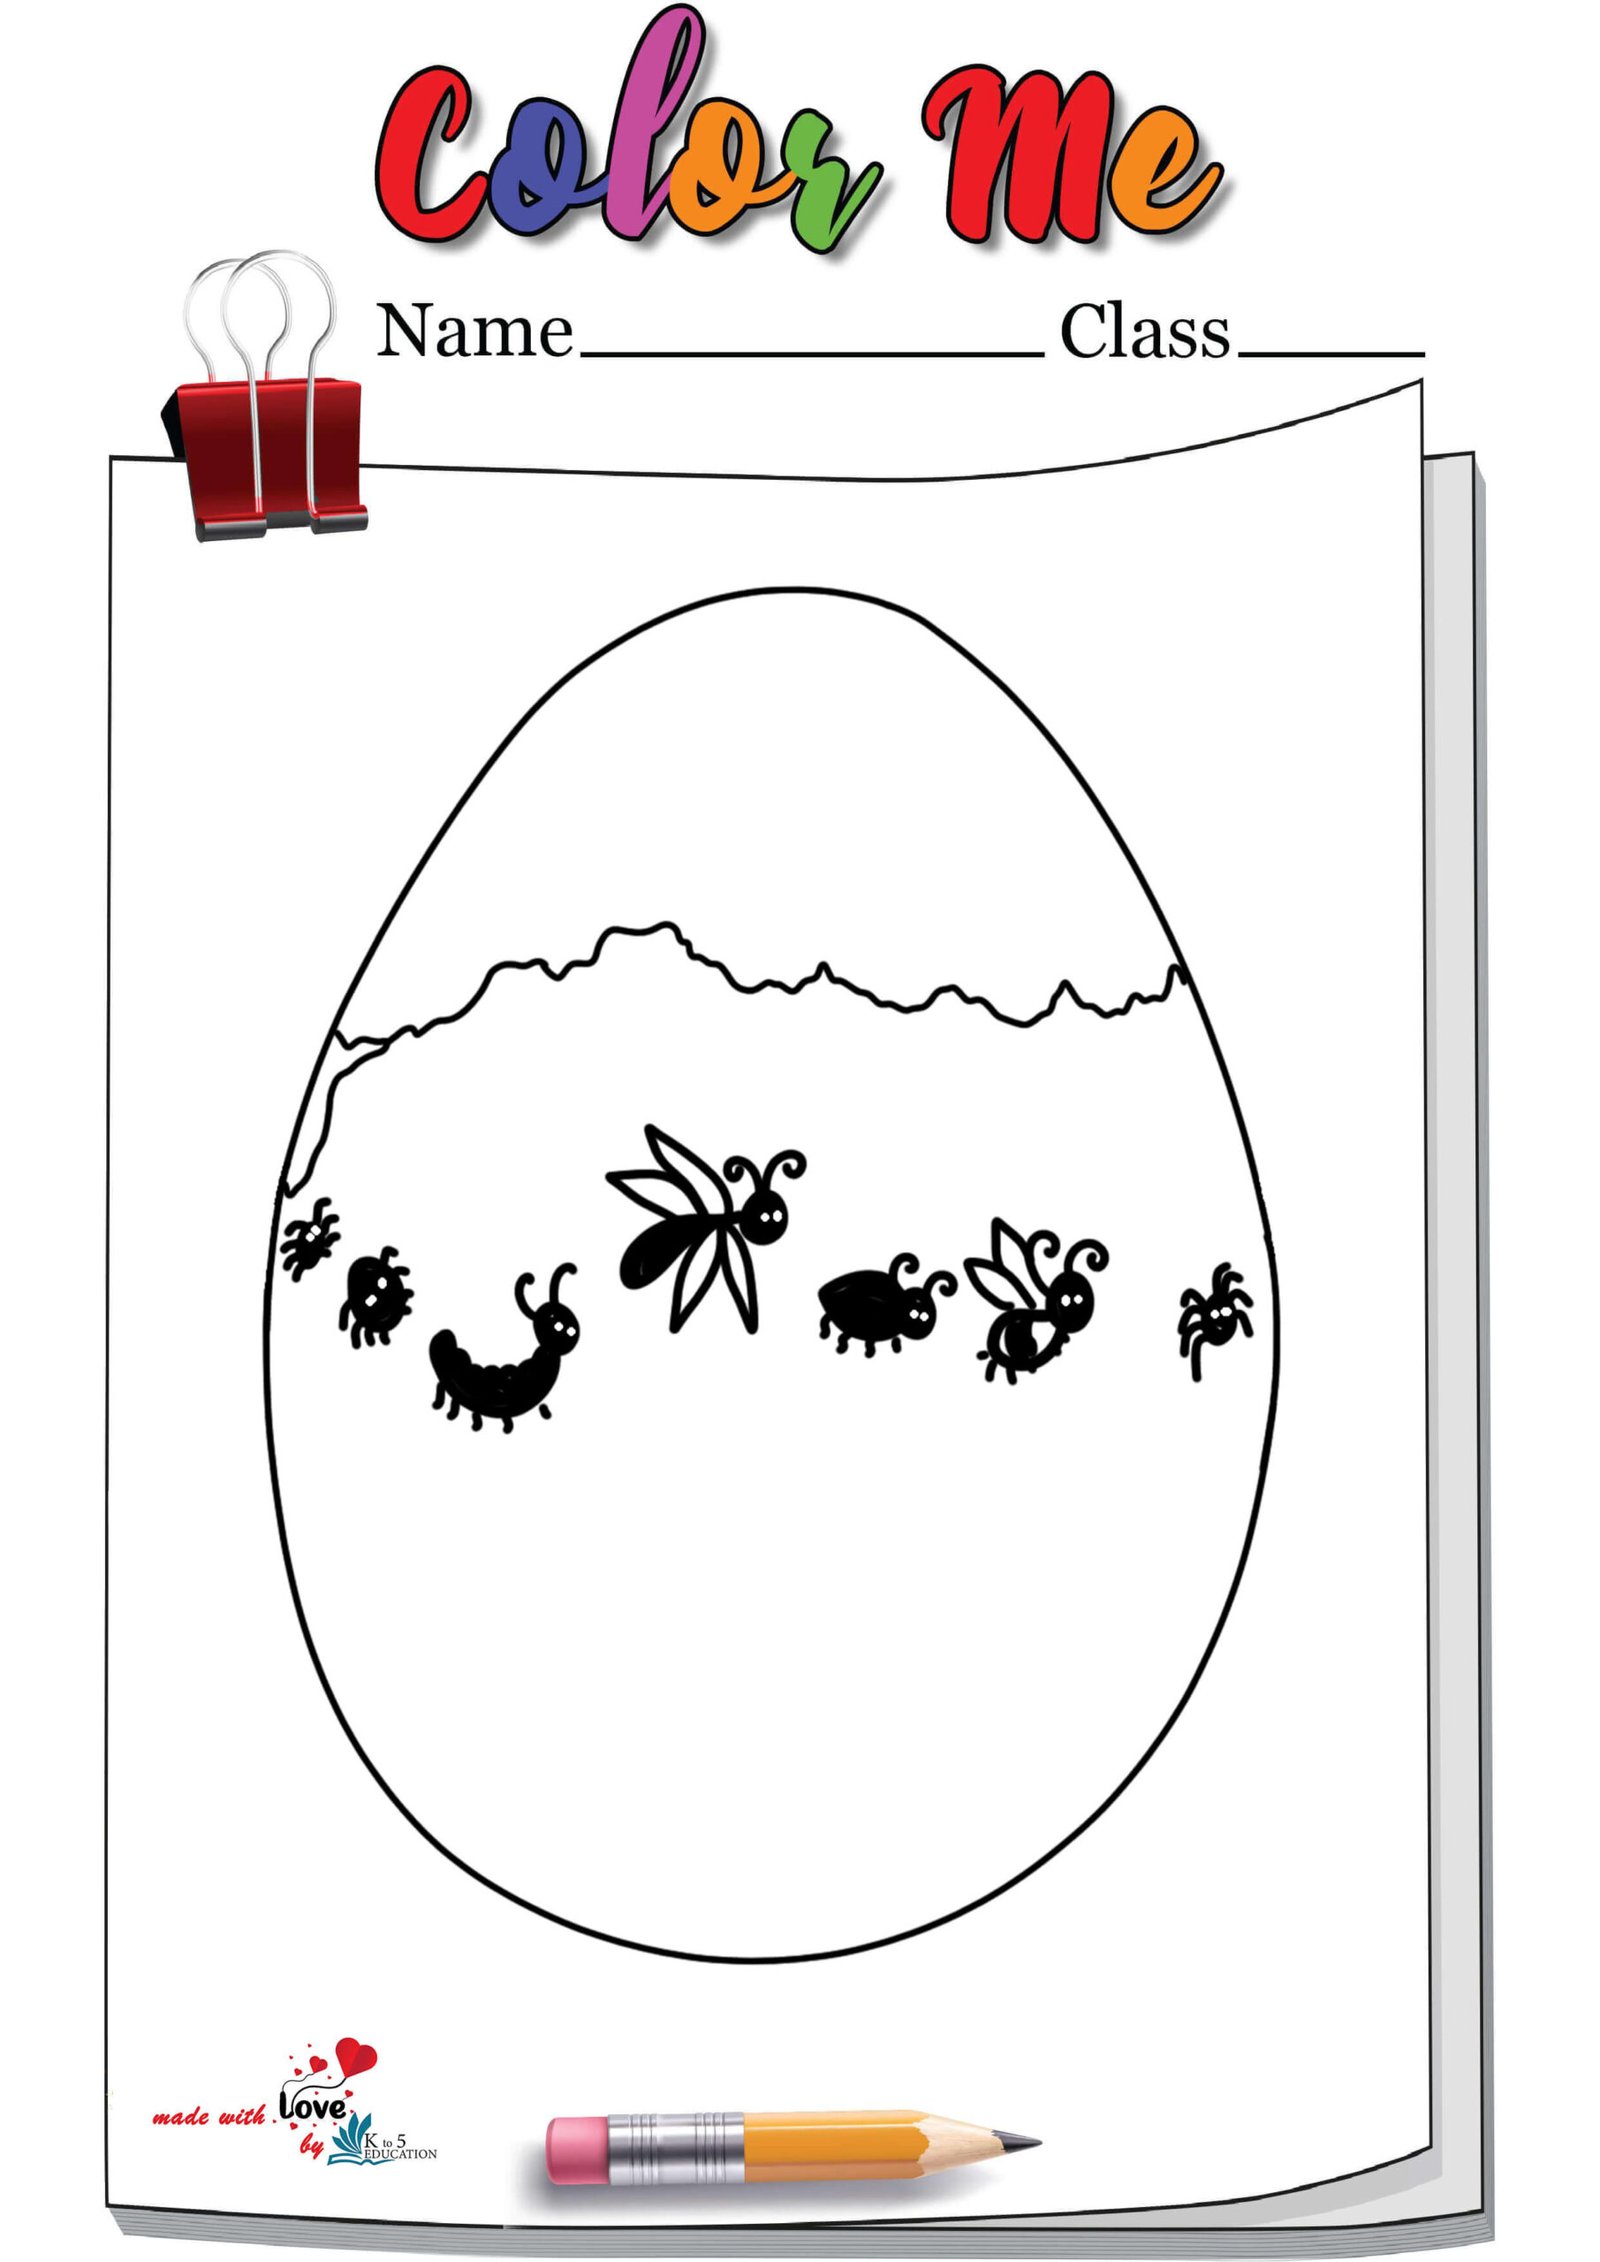 The Big Egg Hunt Coloring Page